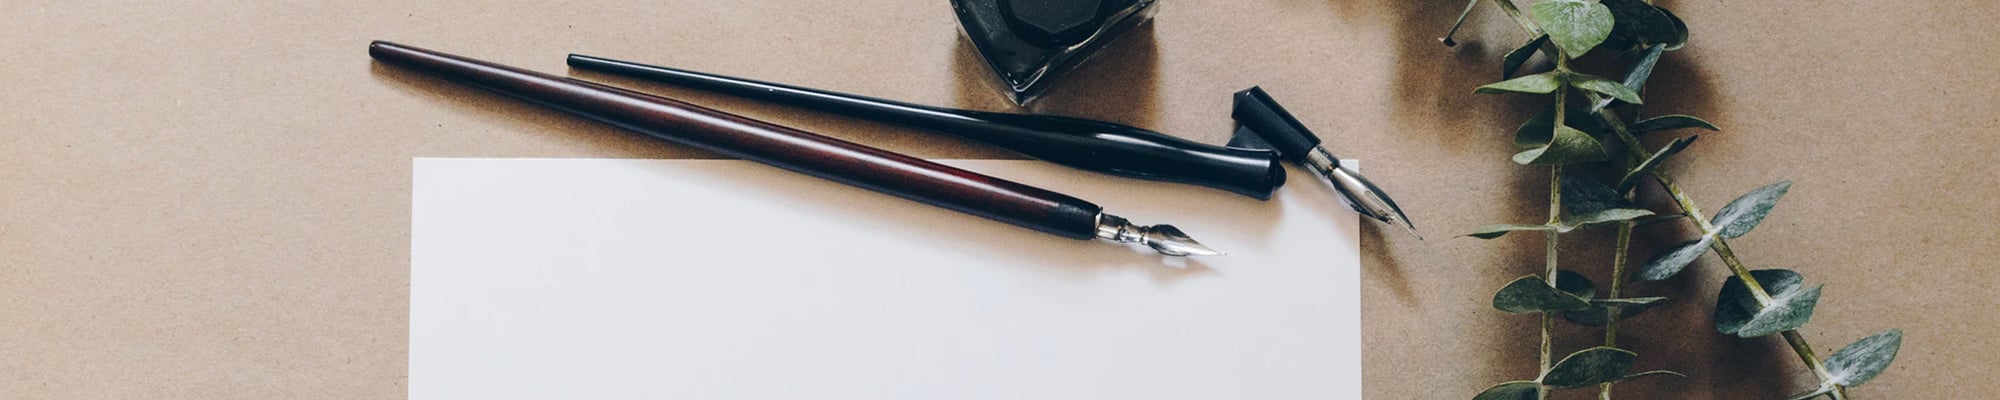 image of white paper with two fountain pens